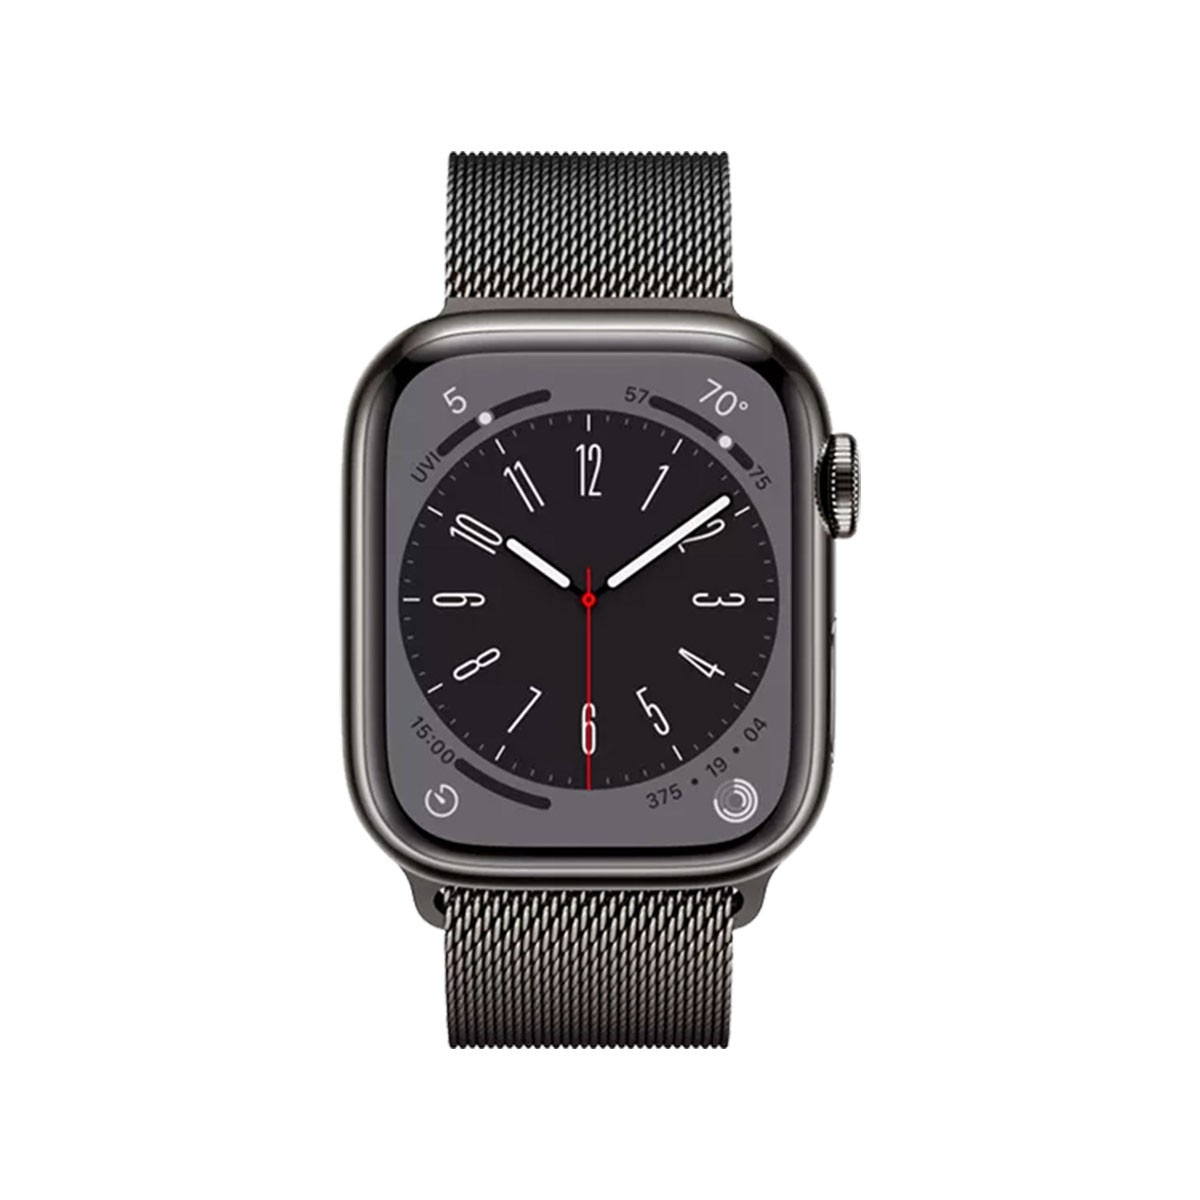 SmartWatch Apple Watch Series 8 GPS + Cellular 41mm Stainless Steel w/ Graphite Milanese Loop Band